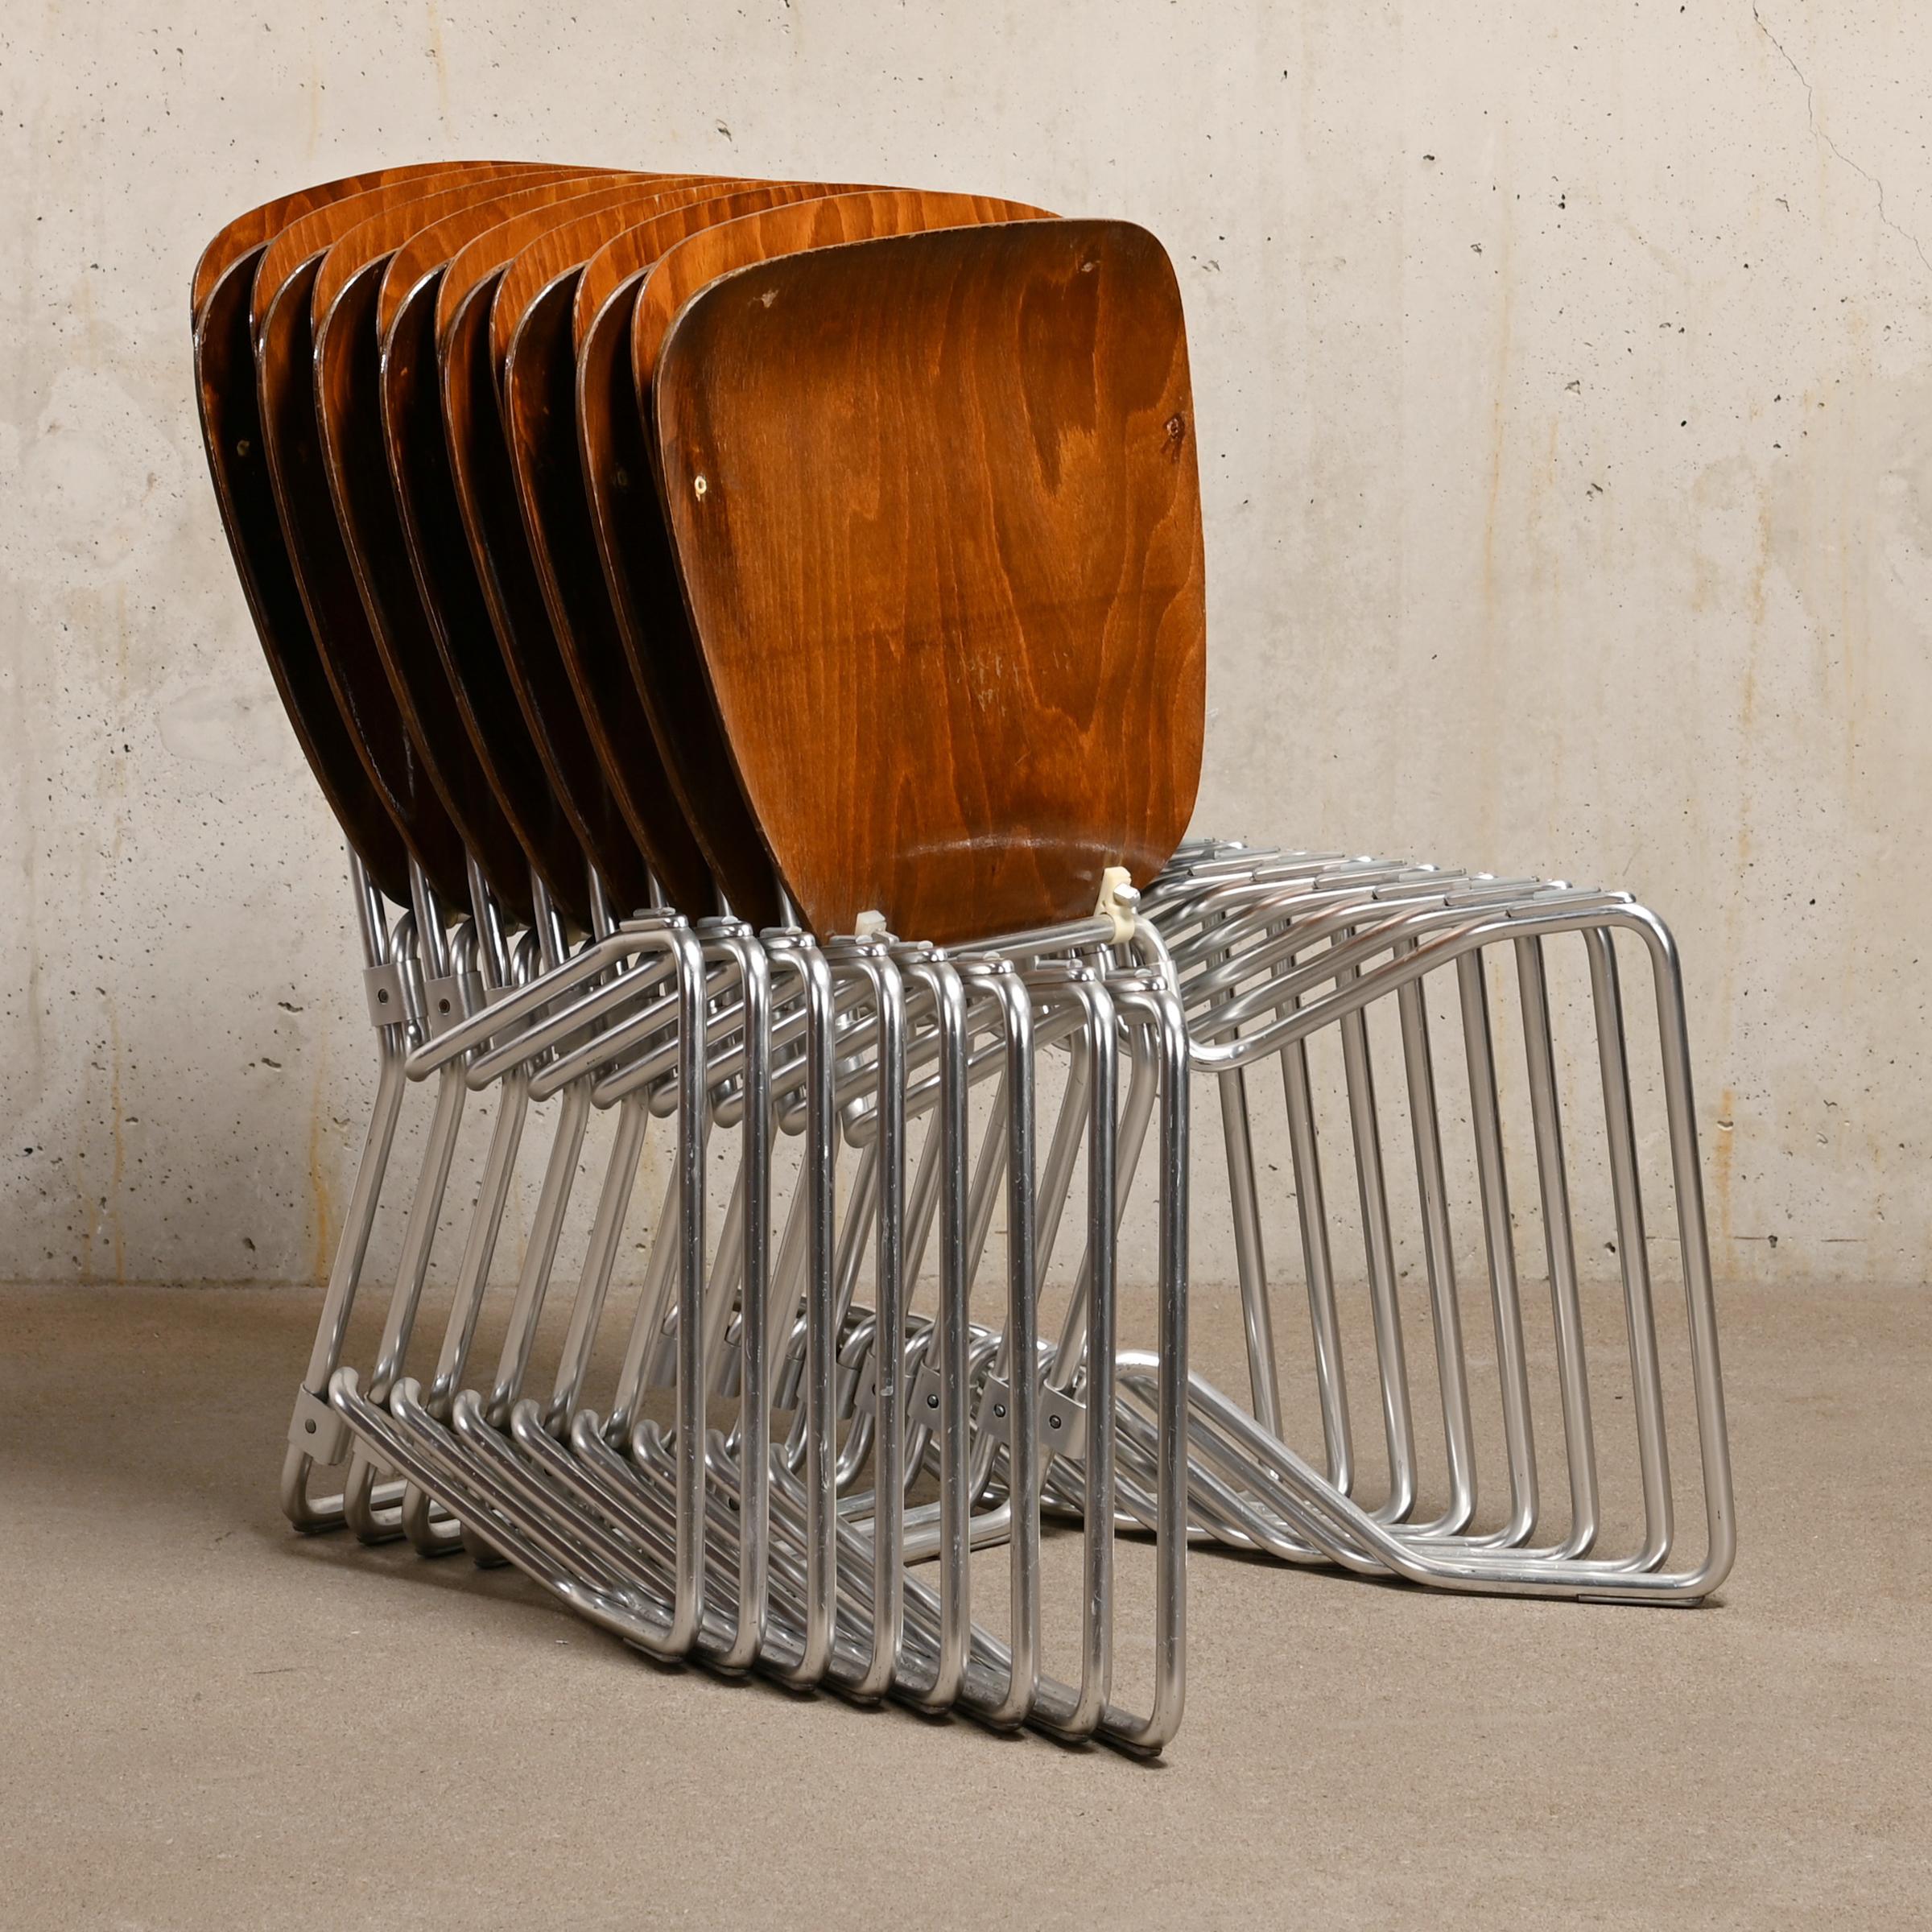 Iconic Aluflex stacking chairs designed by Armin Wirth in 1951 for Philipp Zieringer KG, Switzerland. Very good and thoughtful design for a horizontal stackable chair. Lightweight aluminum frame with dark stained plywood seat and back panel. The